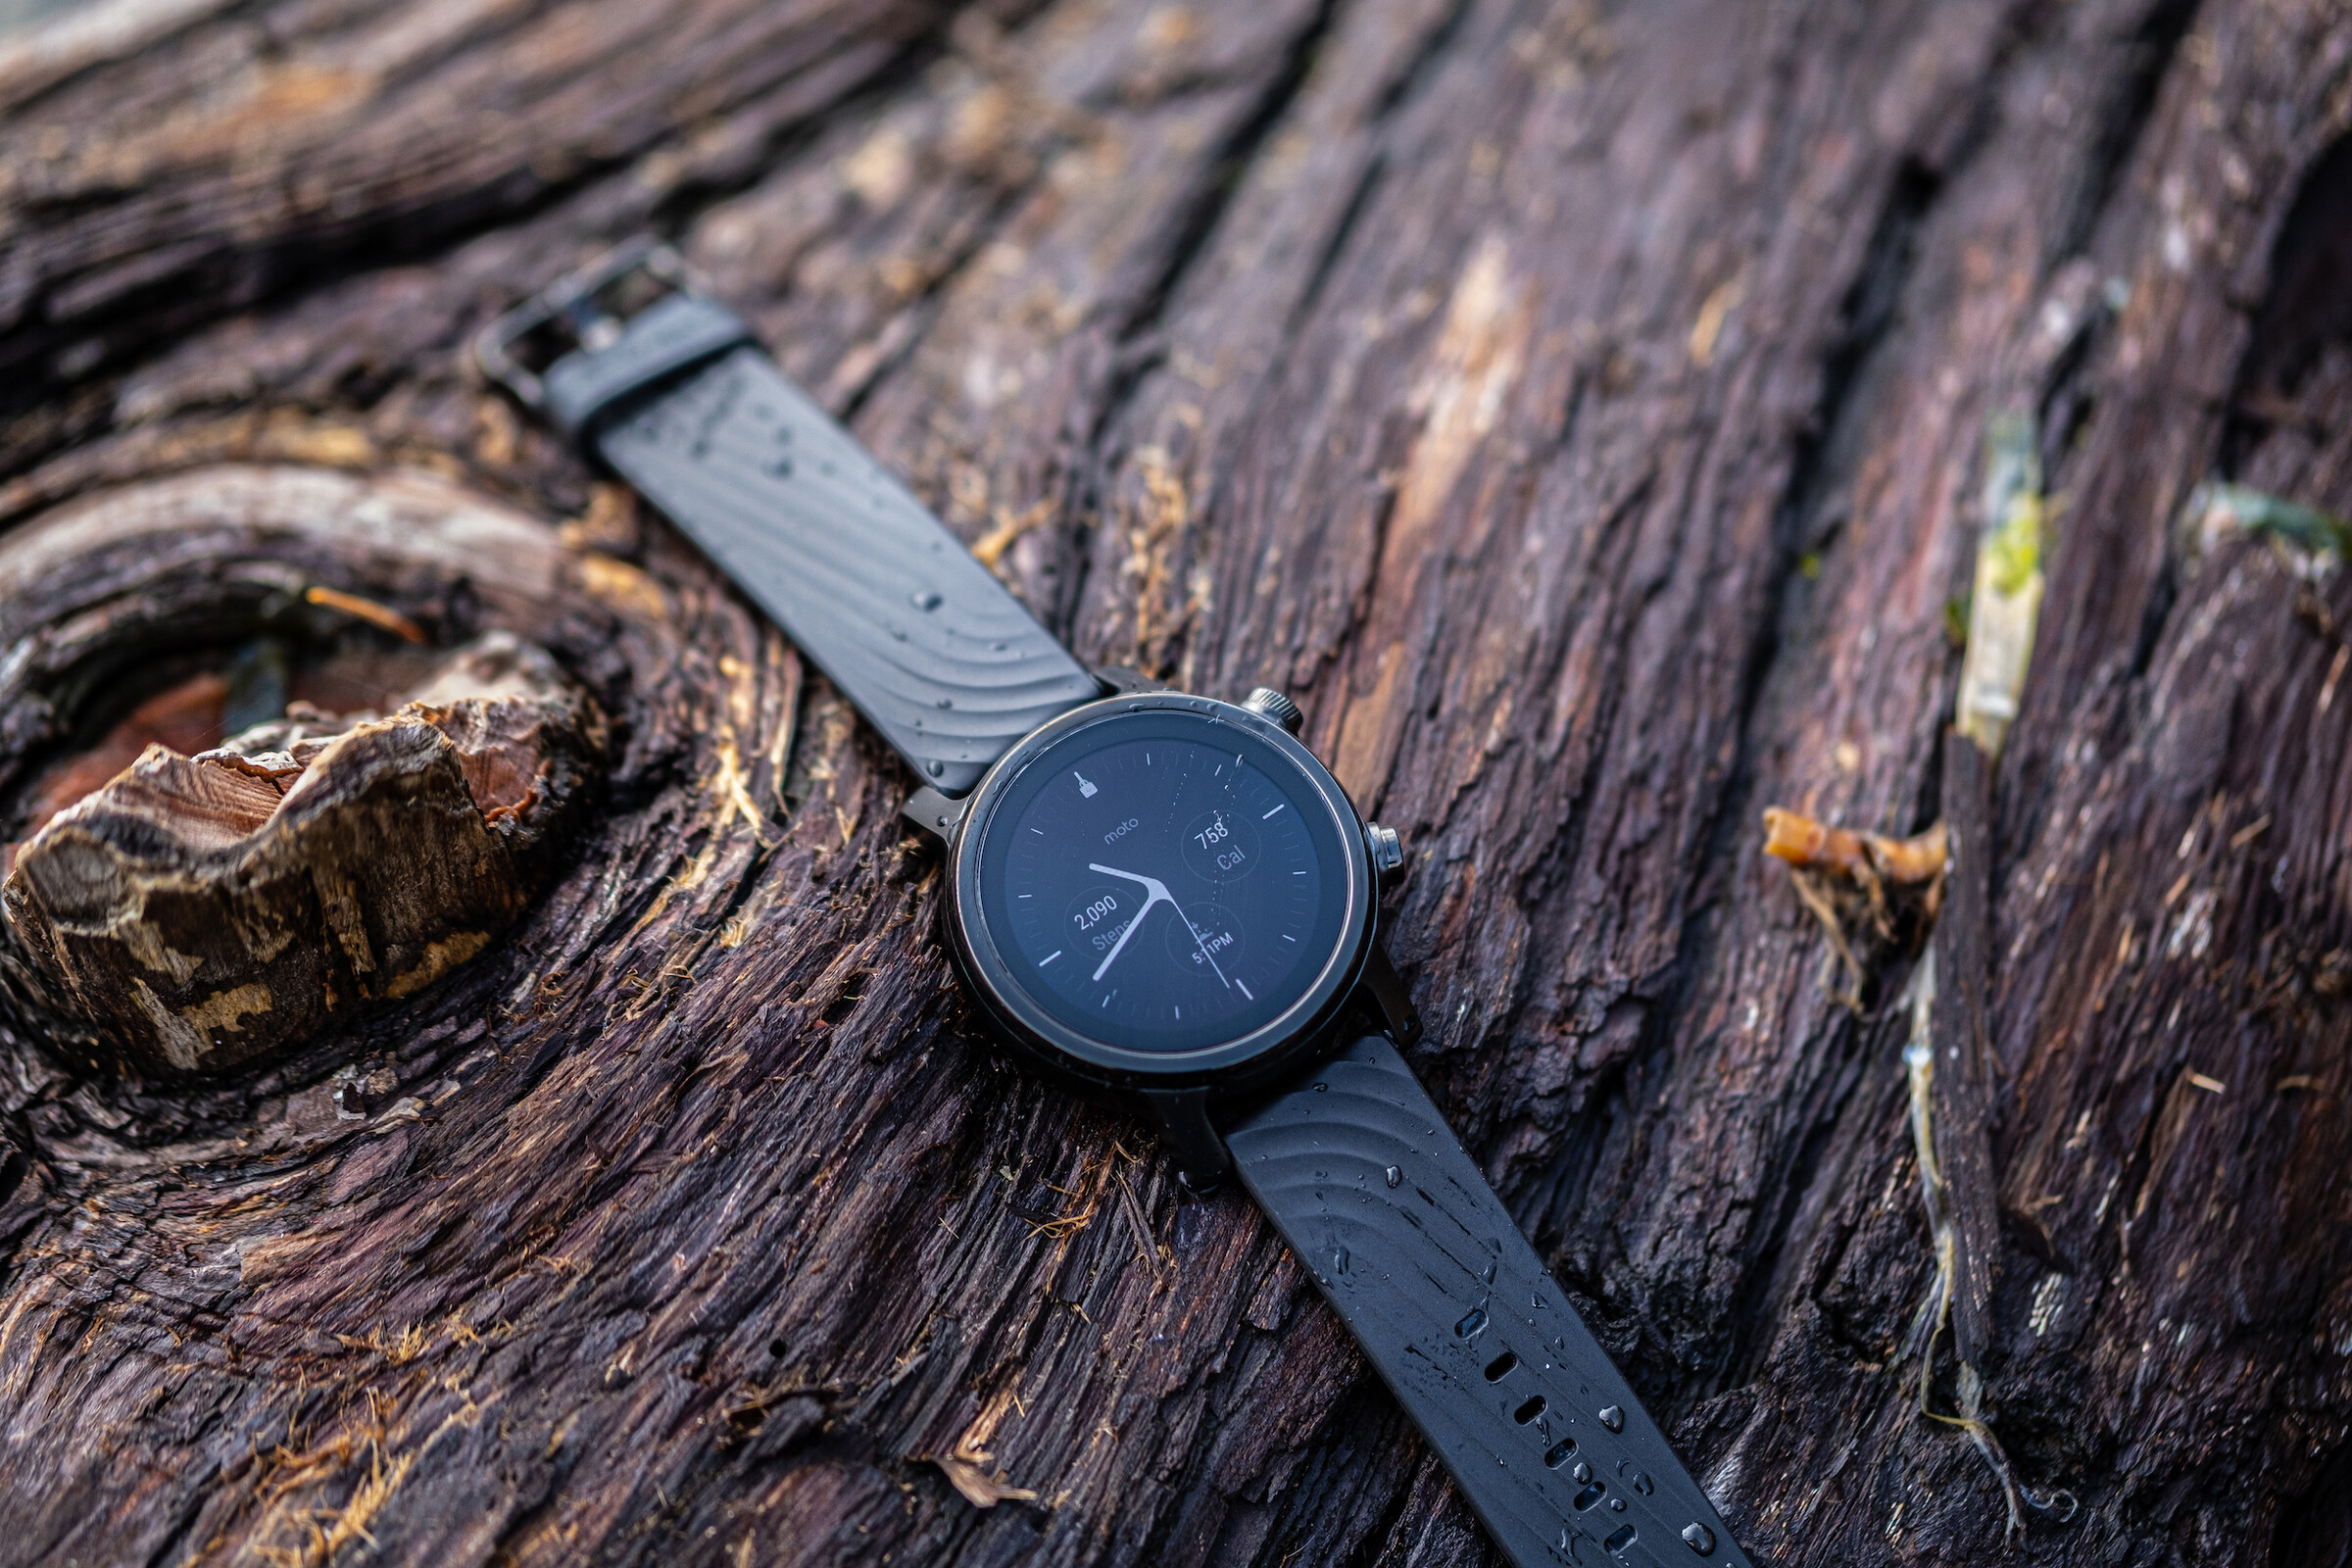 S888: A 4G smartwatch that runs Android and has built-in GPS -   News